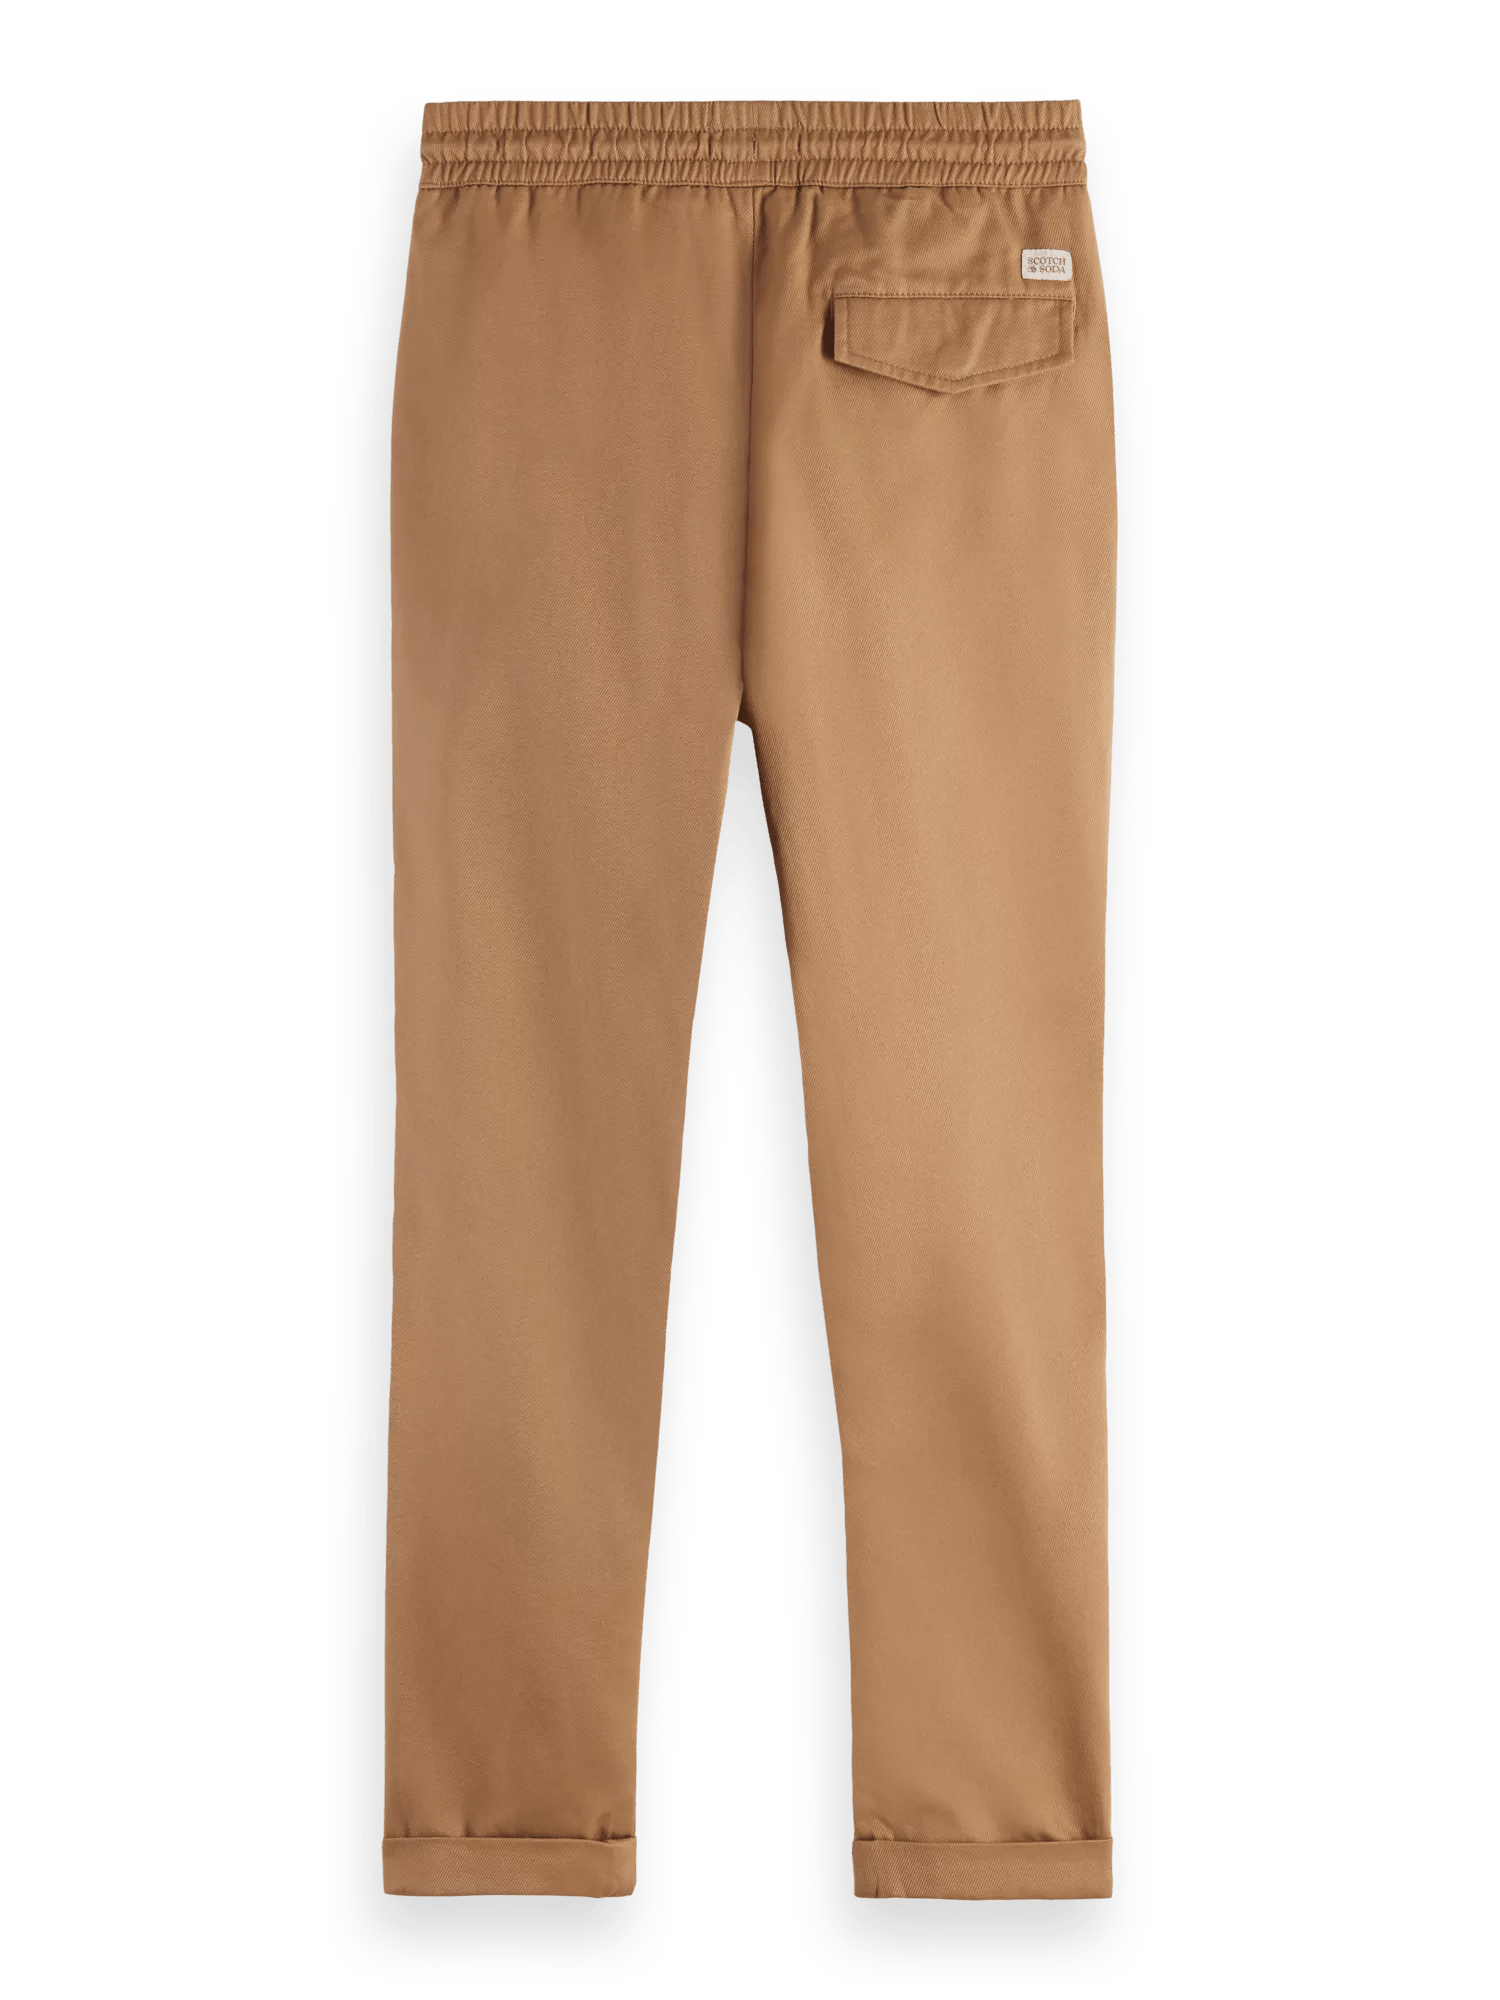 Scotch & Soda Relaxed slim fit organic cotton twill trousers BCK